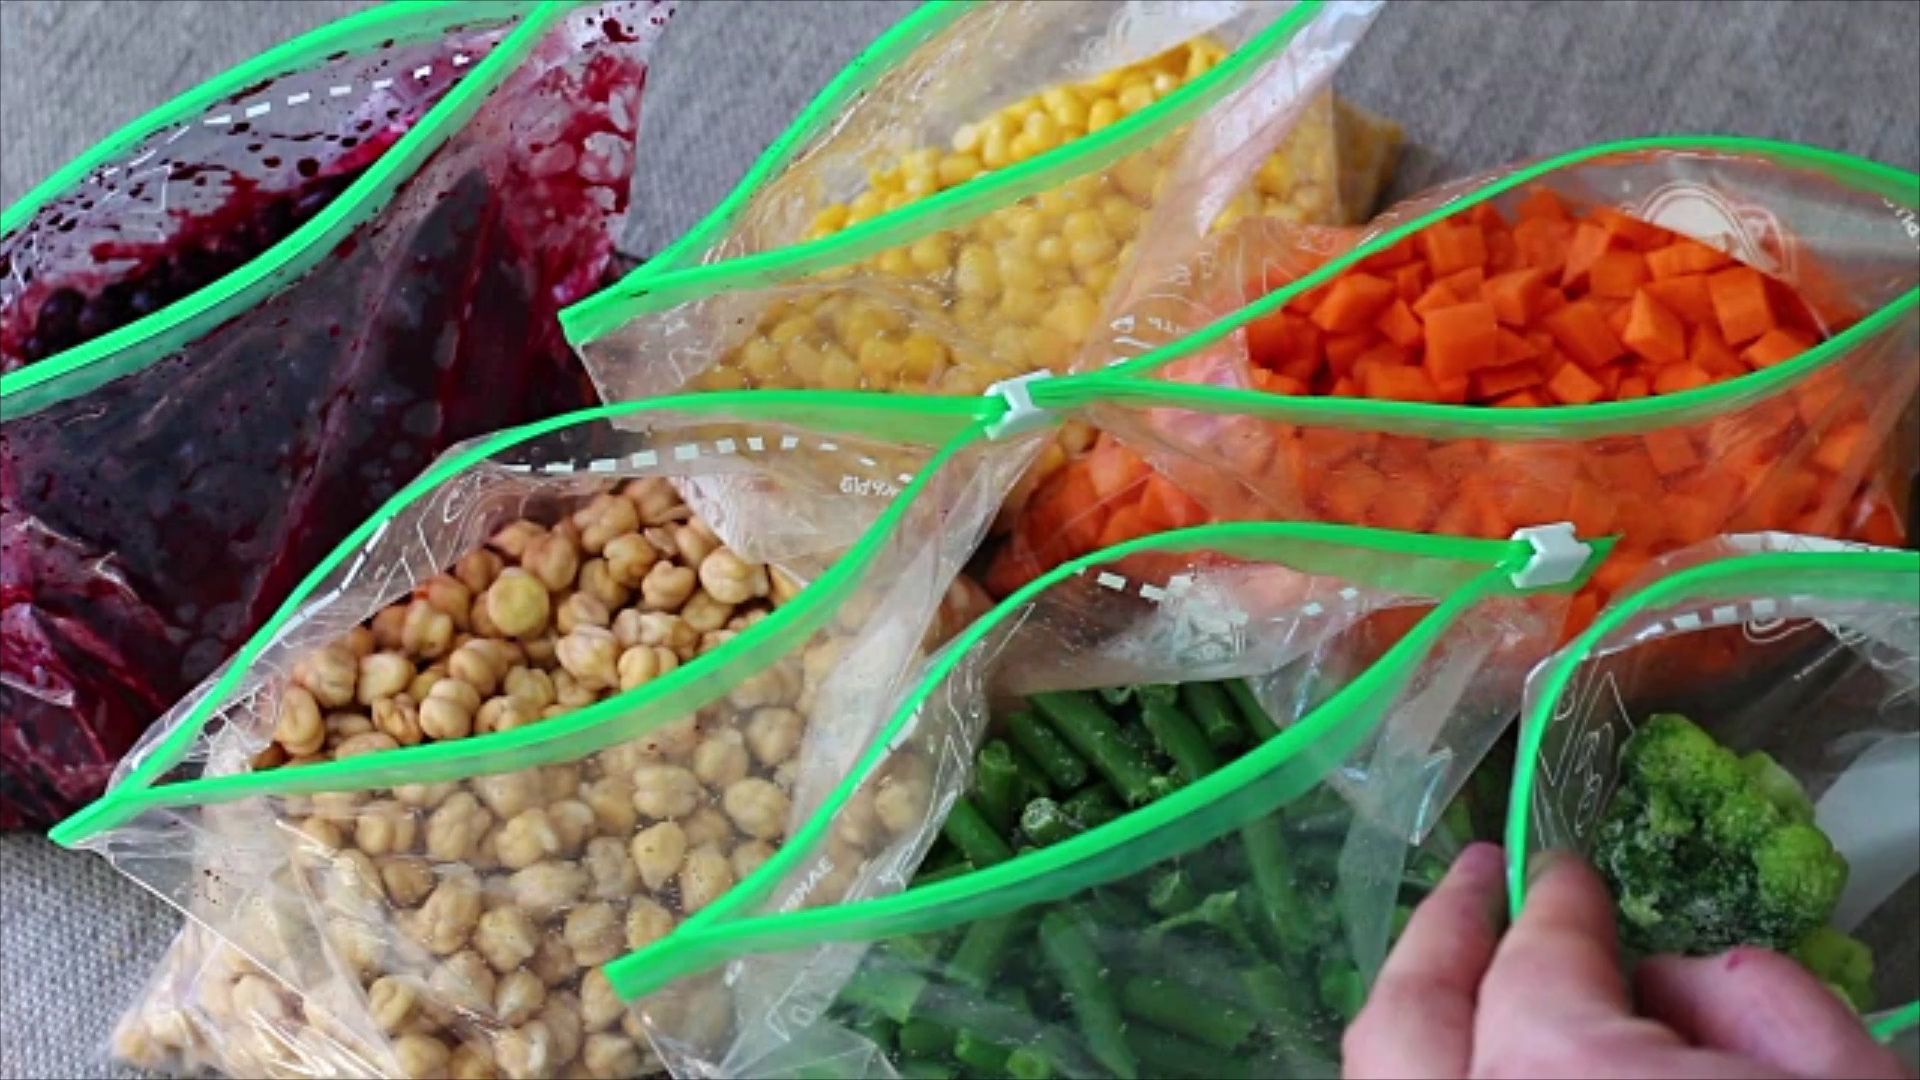 Freezing food properly: Freezer bags or glass?